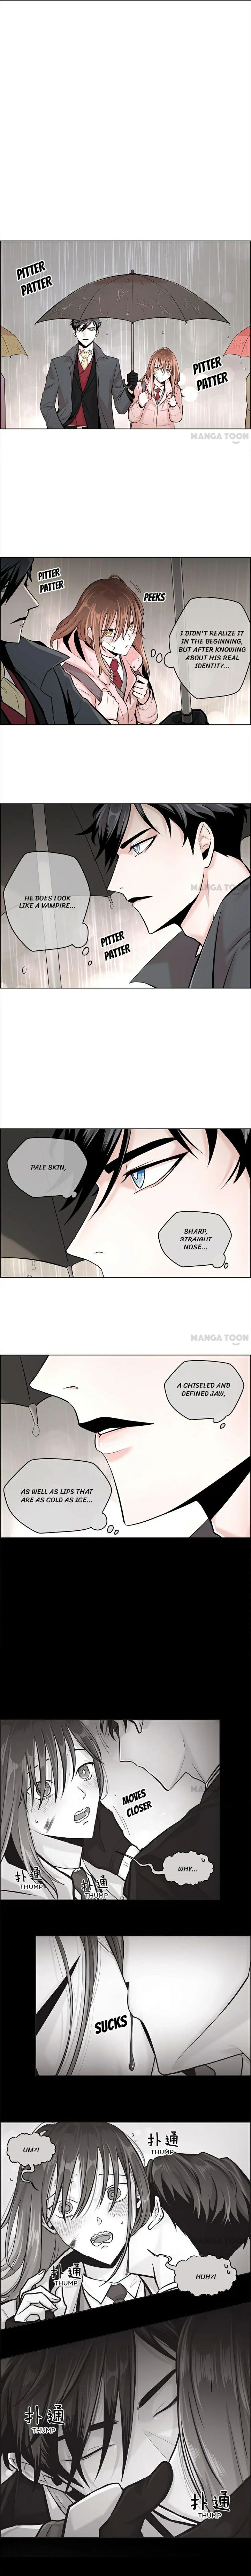 Blood Type Love Chapter 9 page 1